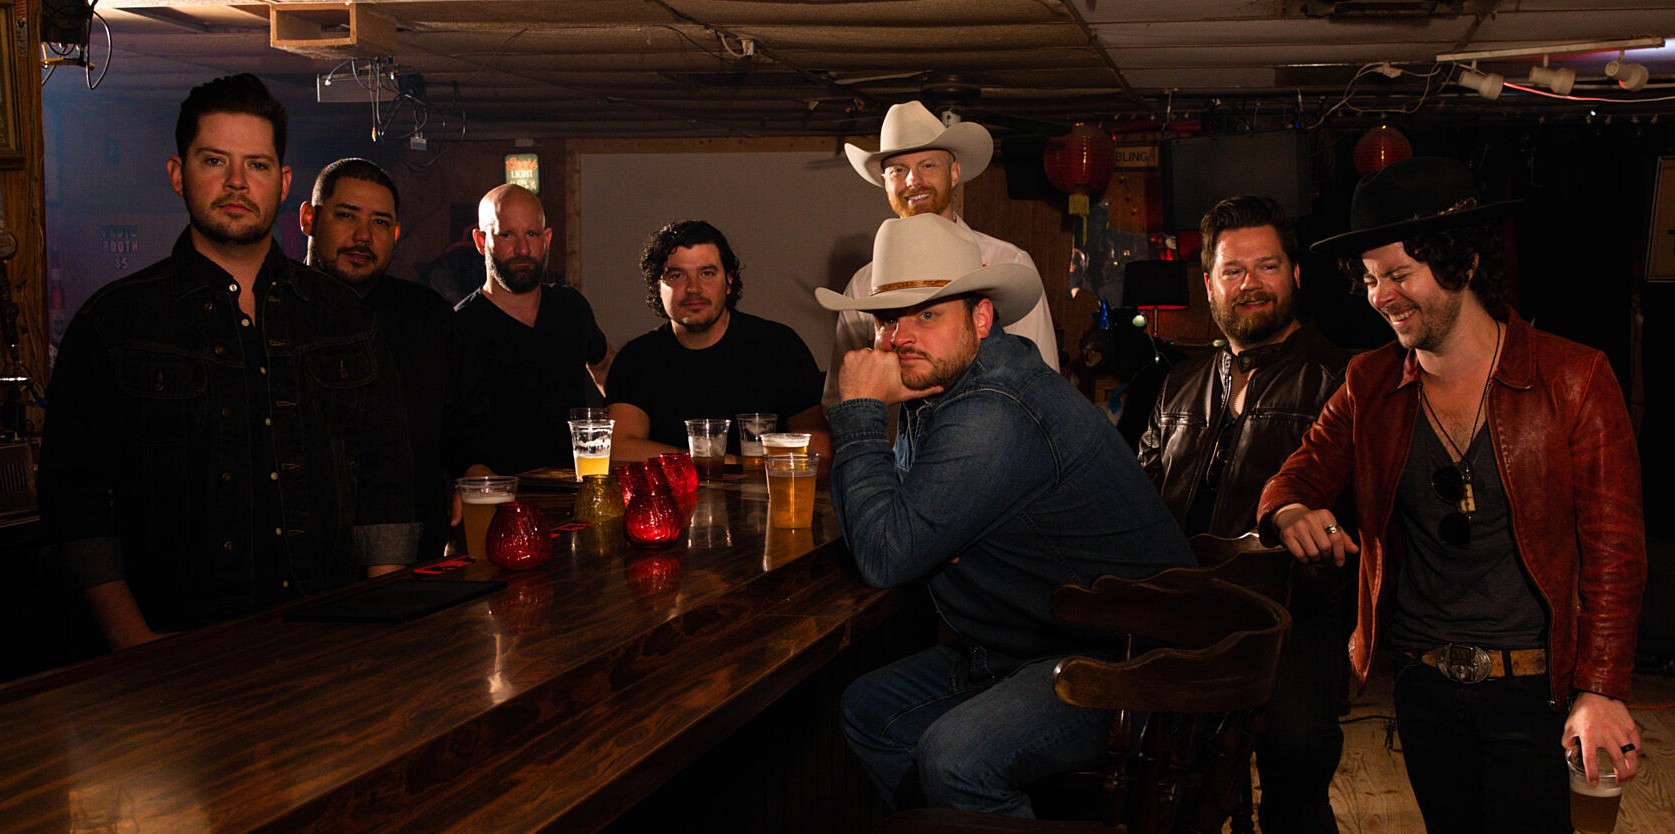  Josh Abbott Band Inks Deal With Make Wake Artists/Deep Roots Management